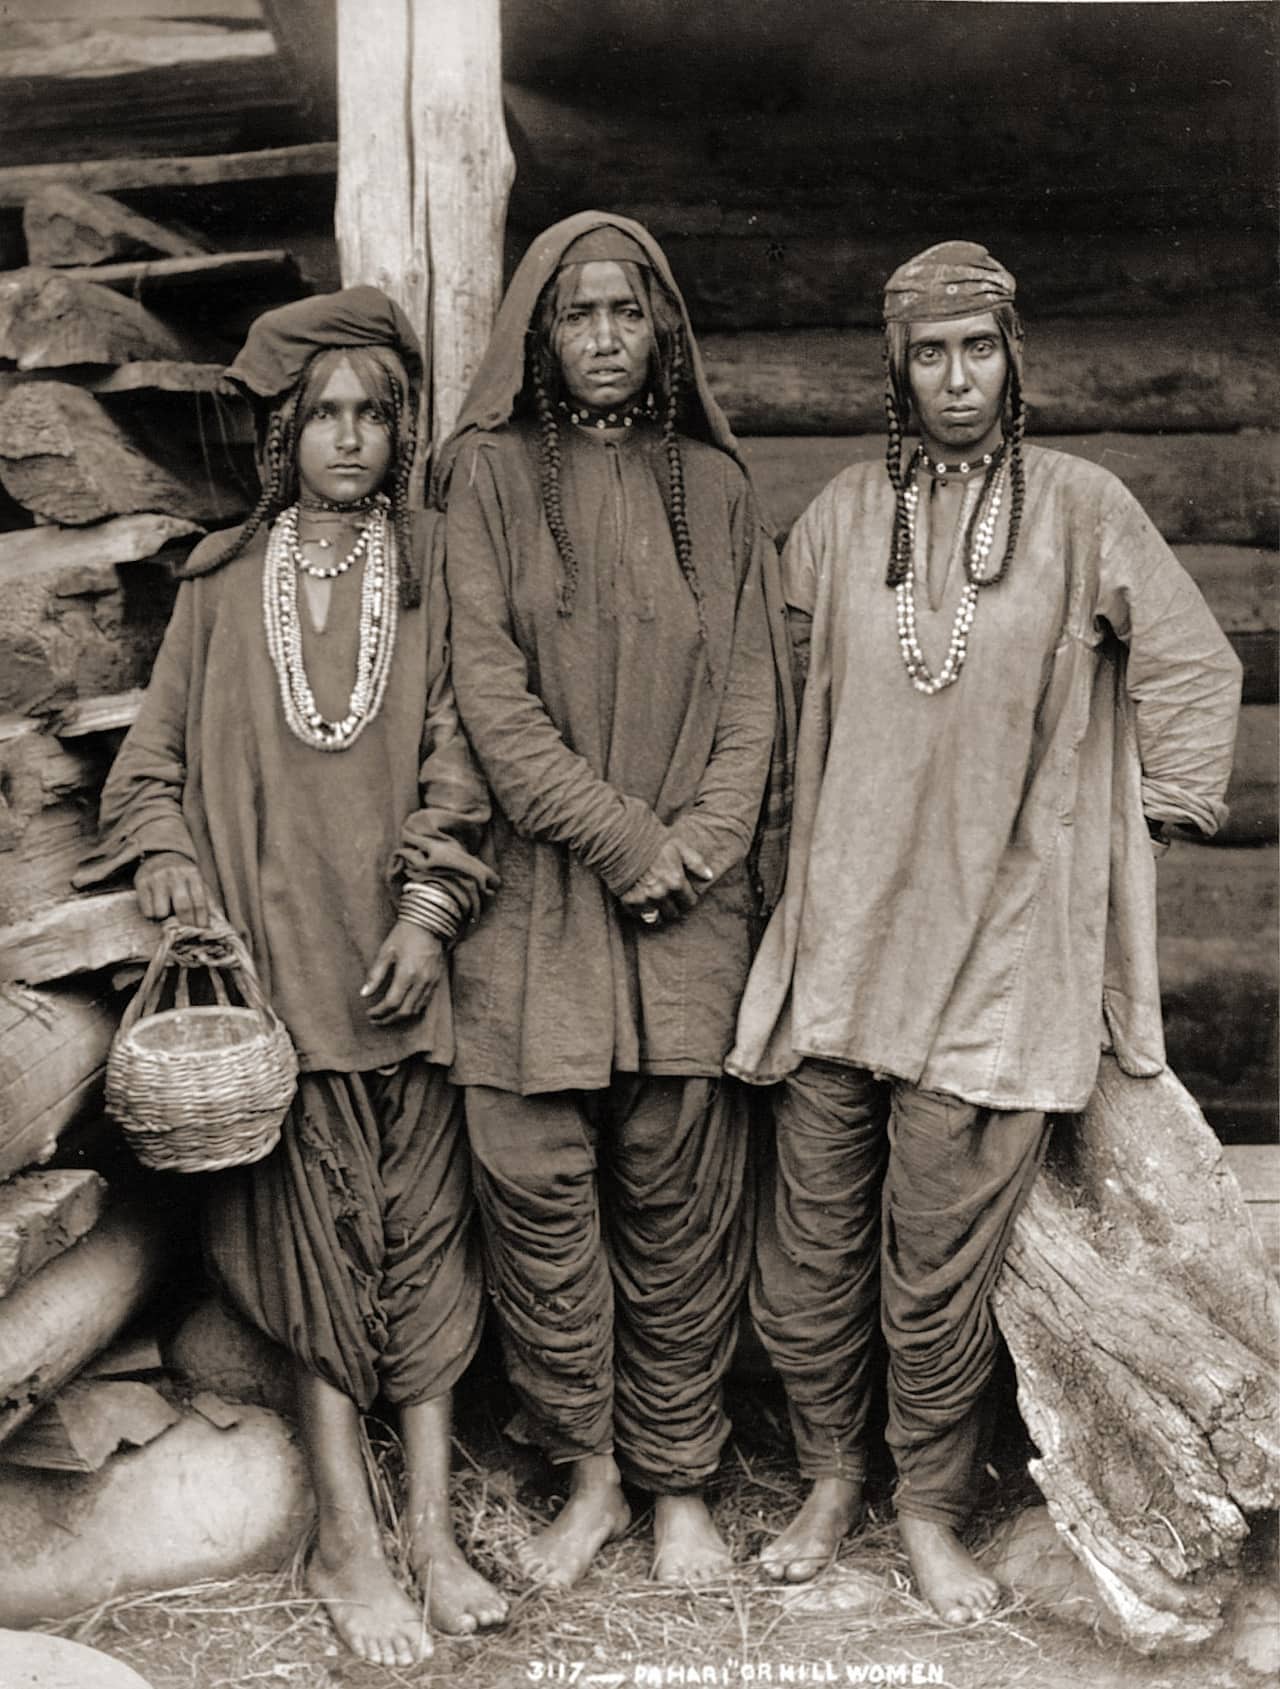 Public domain photo "Pahari" or hill women. Full-length portrait of three Paharia women in the modern-day state of Jammu and Kashmir, taken by an unknown photographer in the 1890s. The text accompanying a similar image of Paharis in John Forbes Watson's 'The People of India' (1869) states,"The Paharis of Bhaugulpoor are a race, inhabiting the hilly and jungly country (the name signifies hillman) of that large territory...They are hunters rather than cultivators. They are largely employed as coolies (or luggage bearers) by persons travelling between the hill and plain country." Oriental and India Office Collection, British Library. Downloaded by me (Fowler&fowler«Talk» 13:58, 1 January 2007 (UTC)) from the British Library web site and then cropped for Wikipedia. Fowler&fowler«Talk» 13:58, 1 January 2007 (UTC)